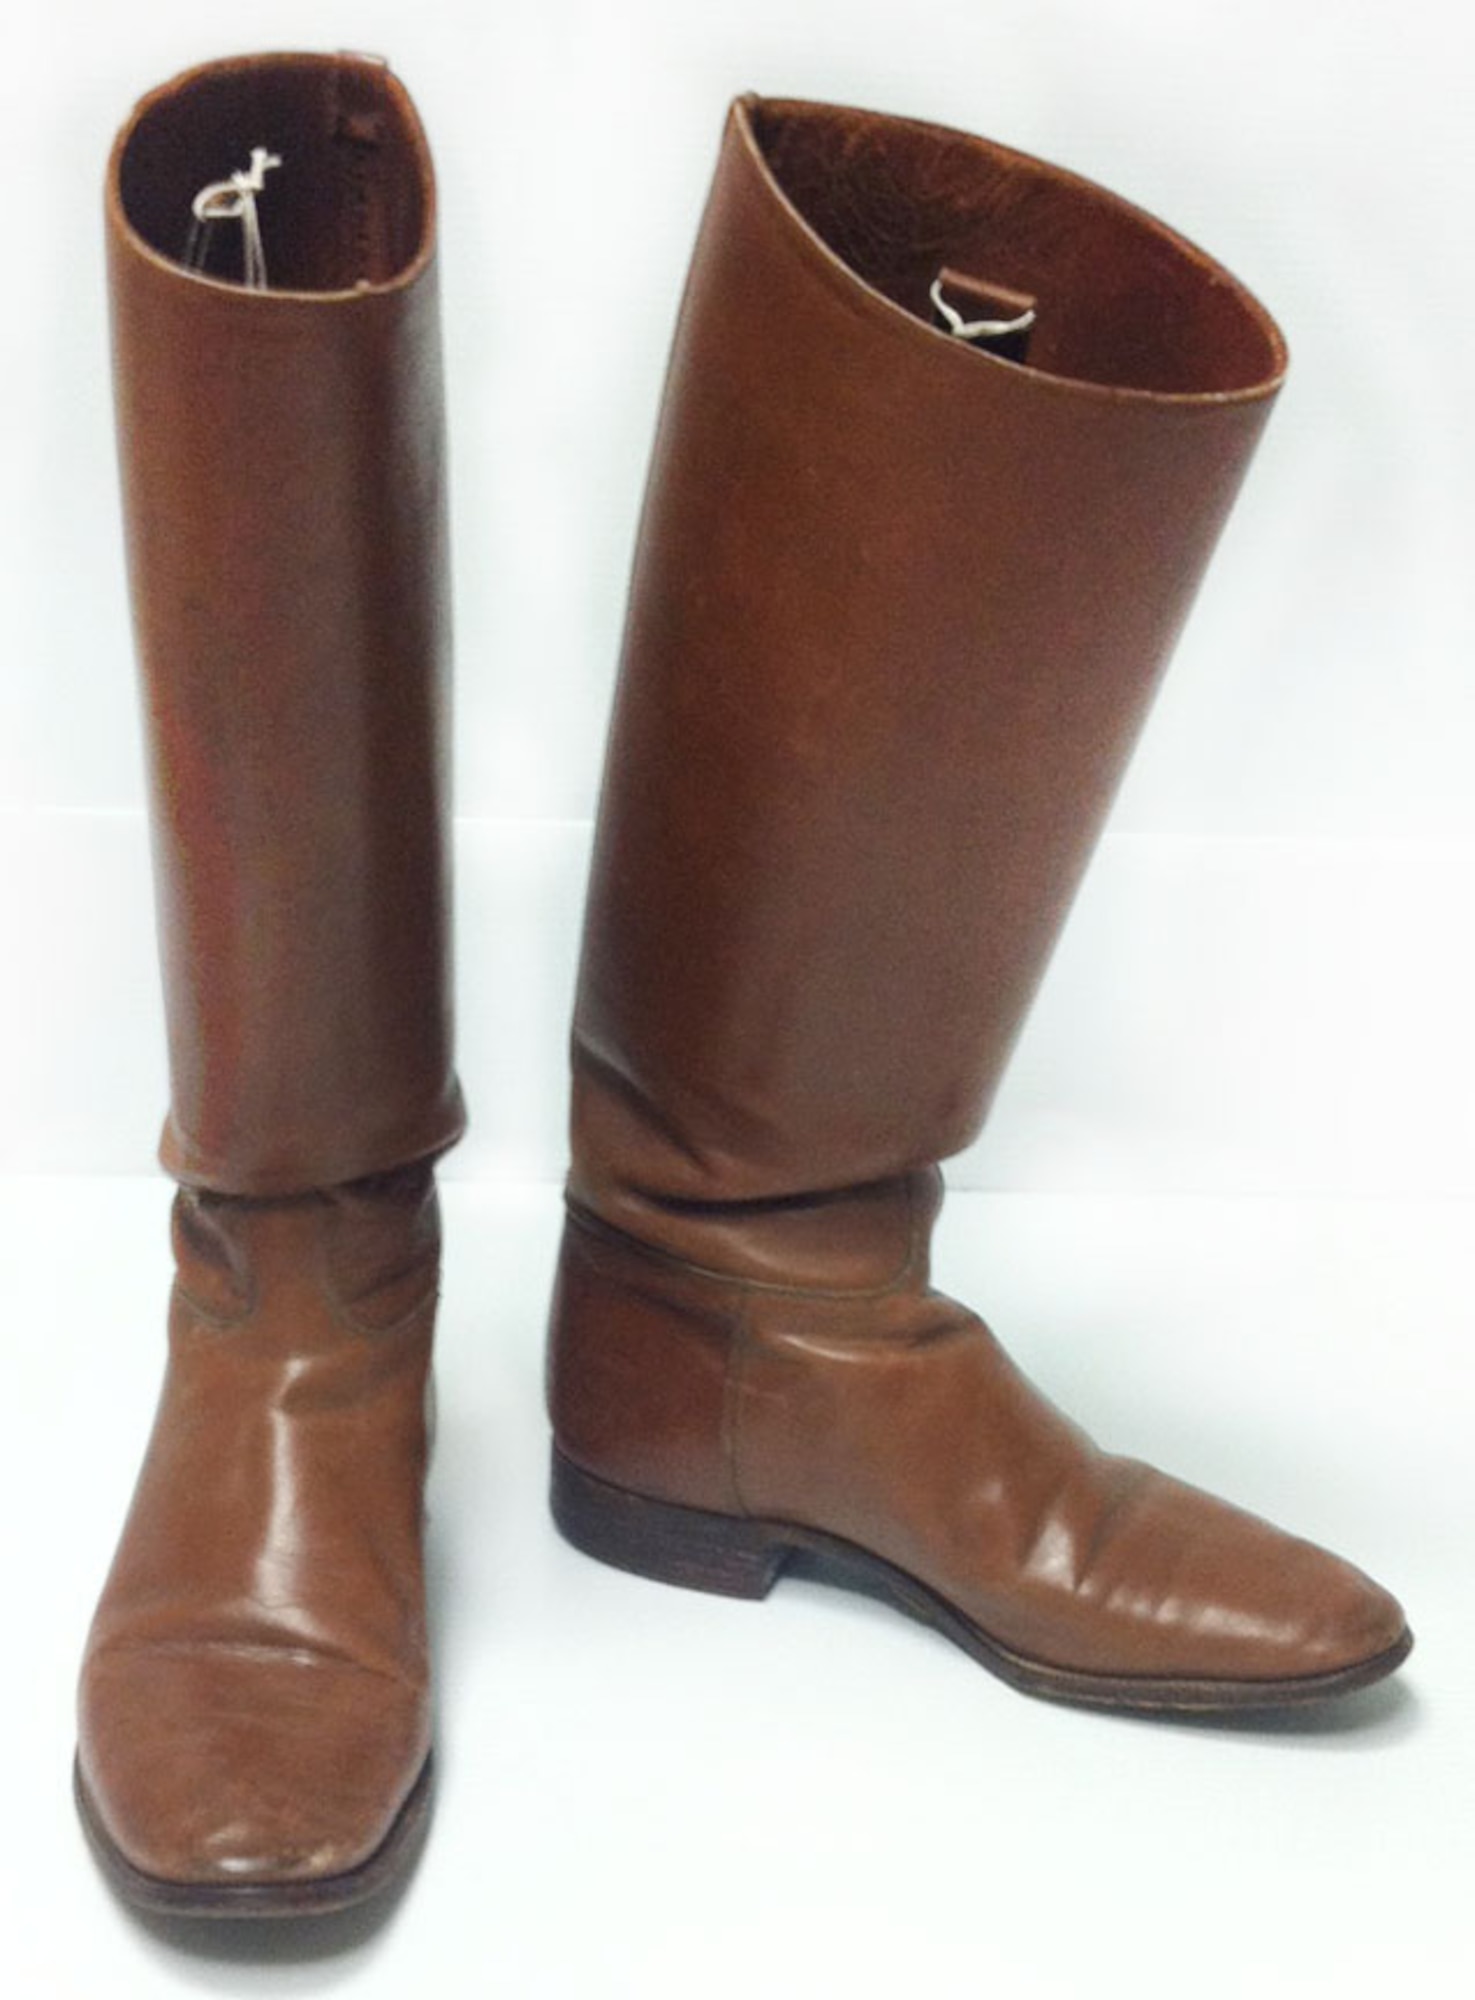 Leather riding boots were worn by members of the U.S. Cavalry Units during World War I. The tall shafts of these riding boots helped to protect cavalry soldiers' lower legs from debris kicked up by their horses, as well as protecting from riding impact against their horses. Horses were used during WWI for logistical support and reconnaissance, as well as for pulling equipment such as field guns, supply wagons and ambulances. (U.S. Air Force photo)